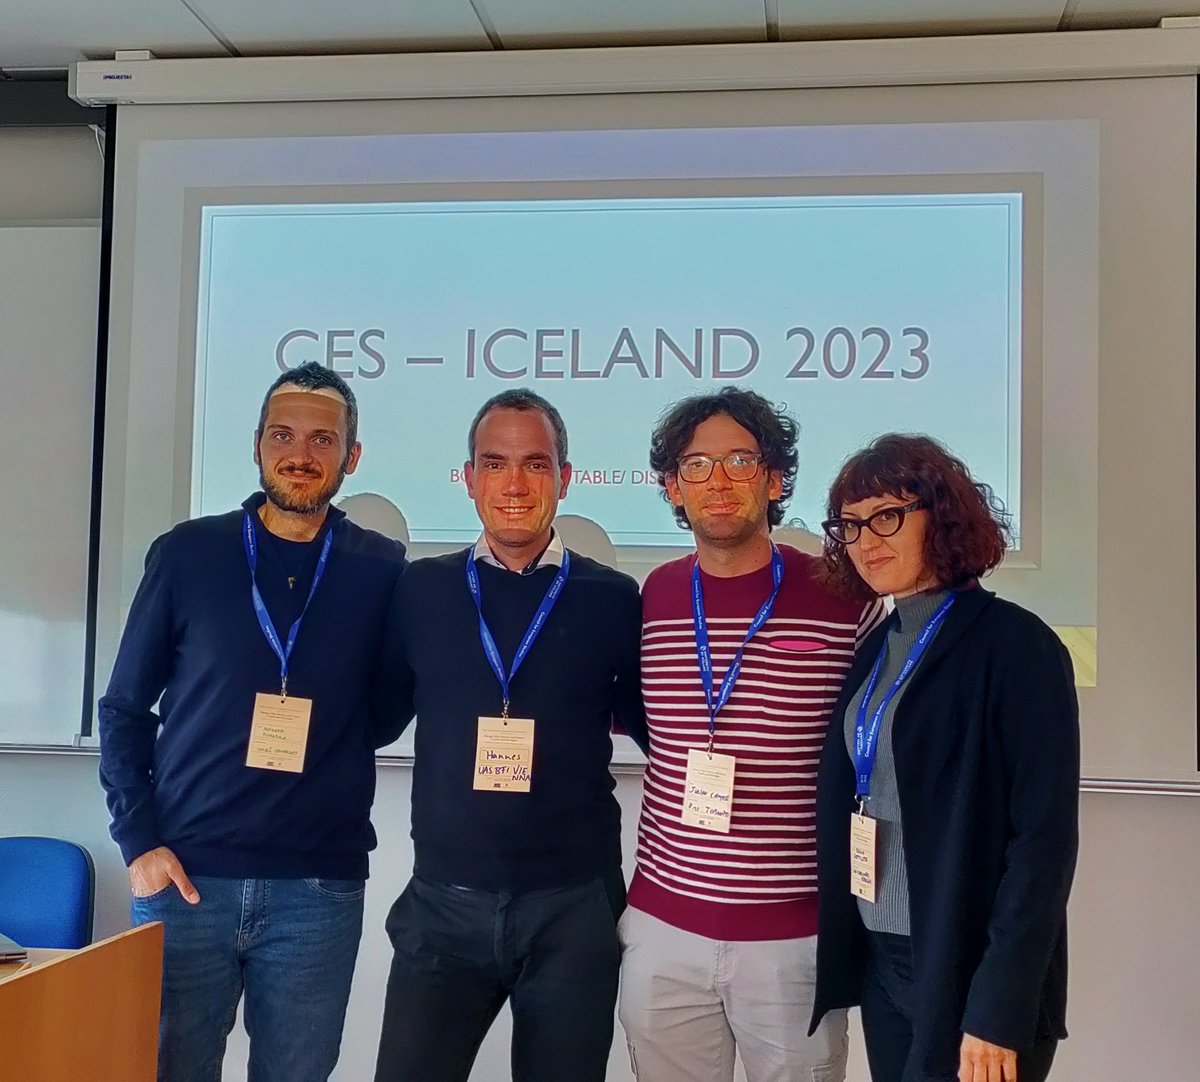 Delighted to be presenting our #politicalrisk book project at the @CES_Europe conference in Reykjavik! With @AndreFumarola @jmcampisi #hannesmeissner